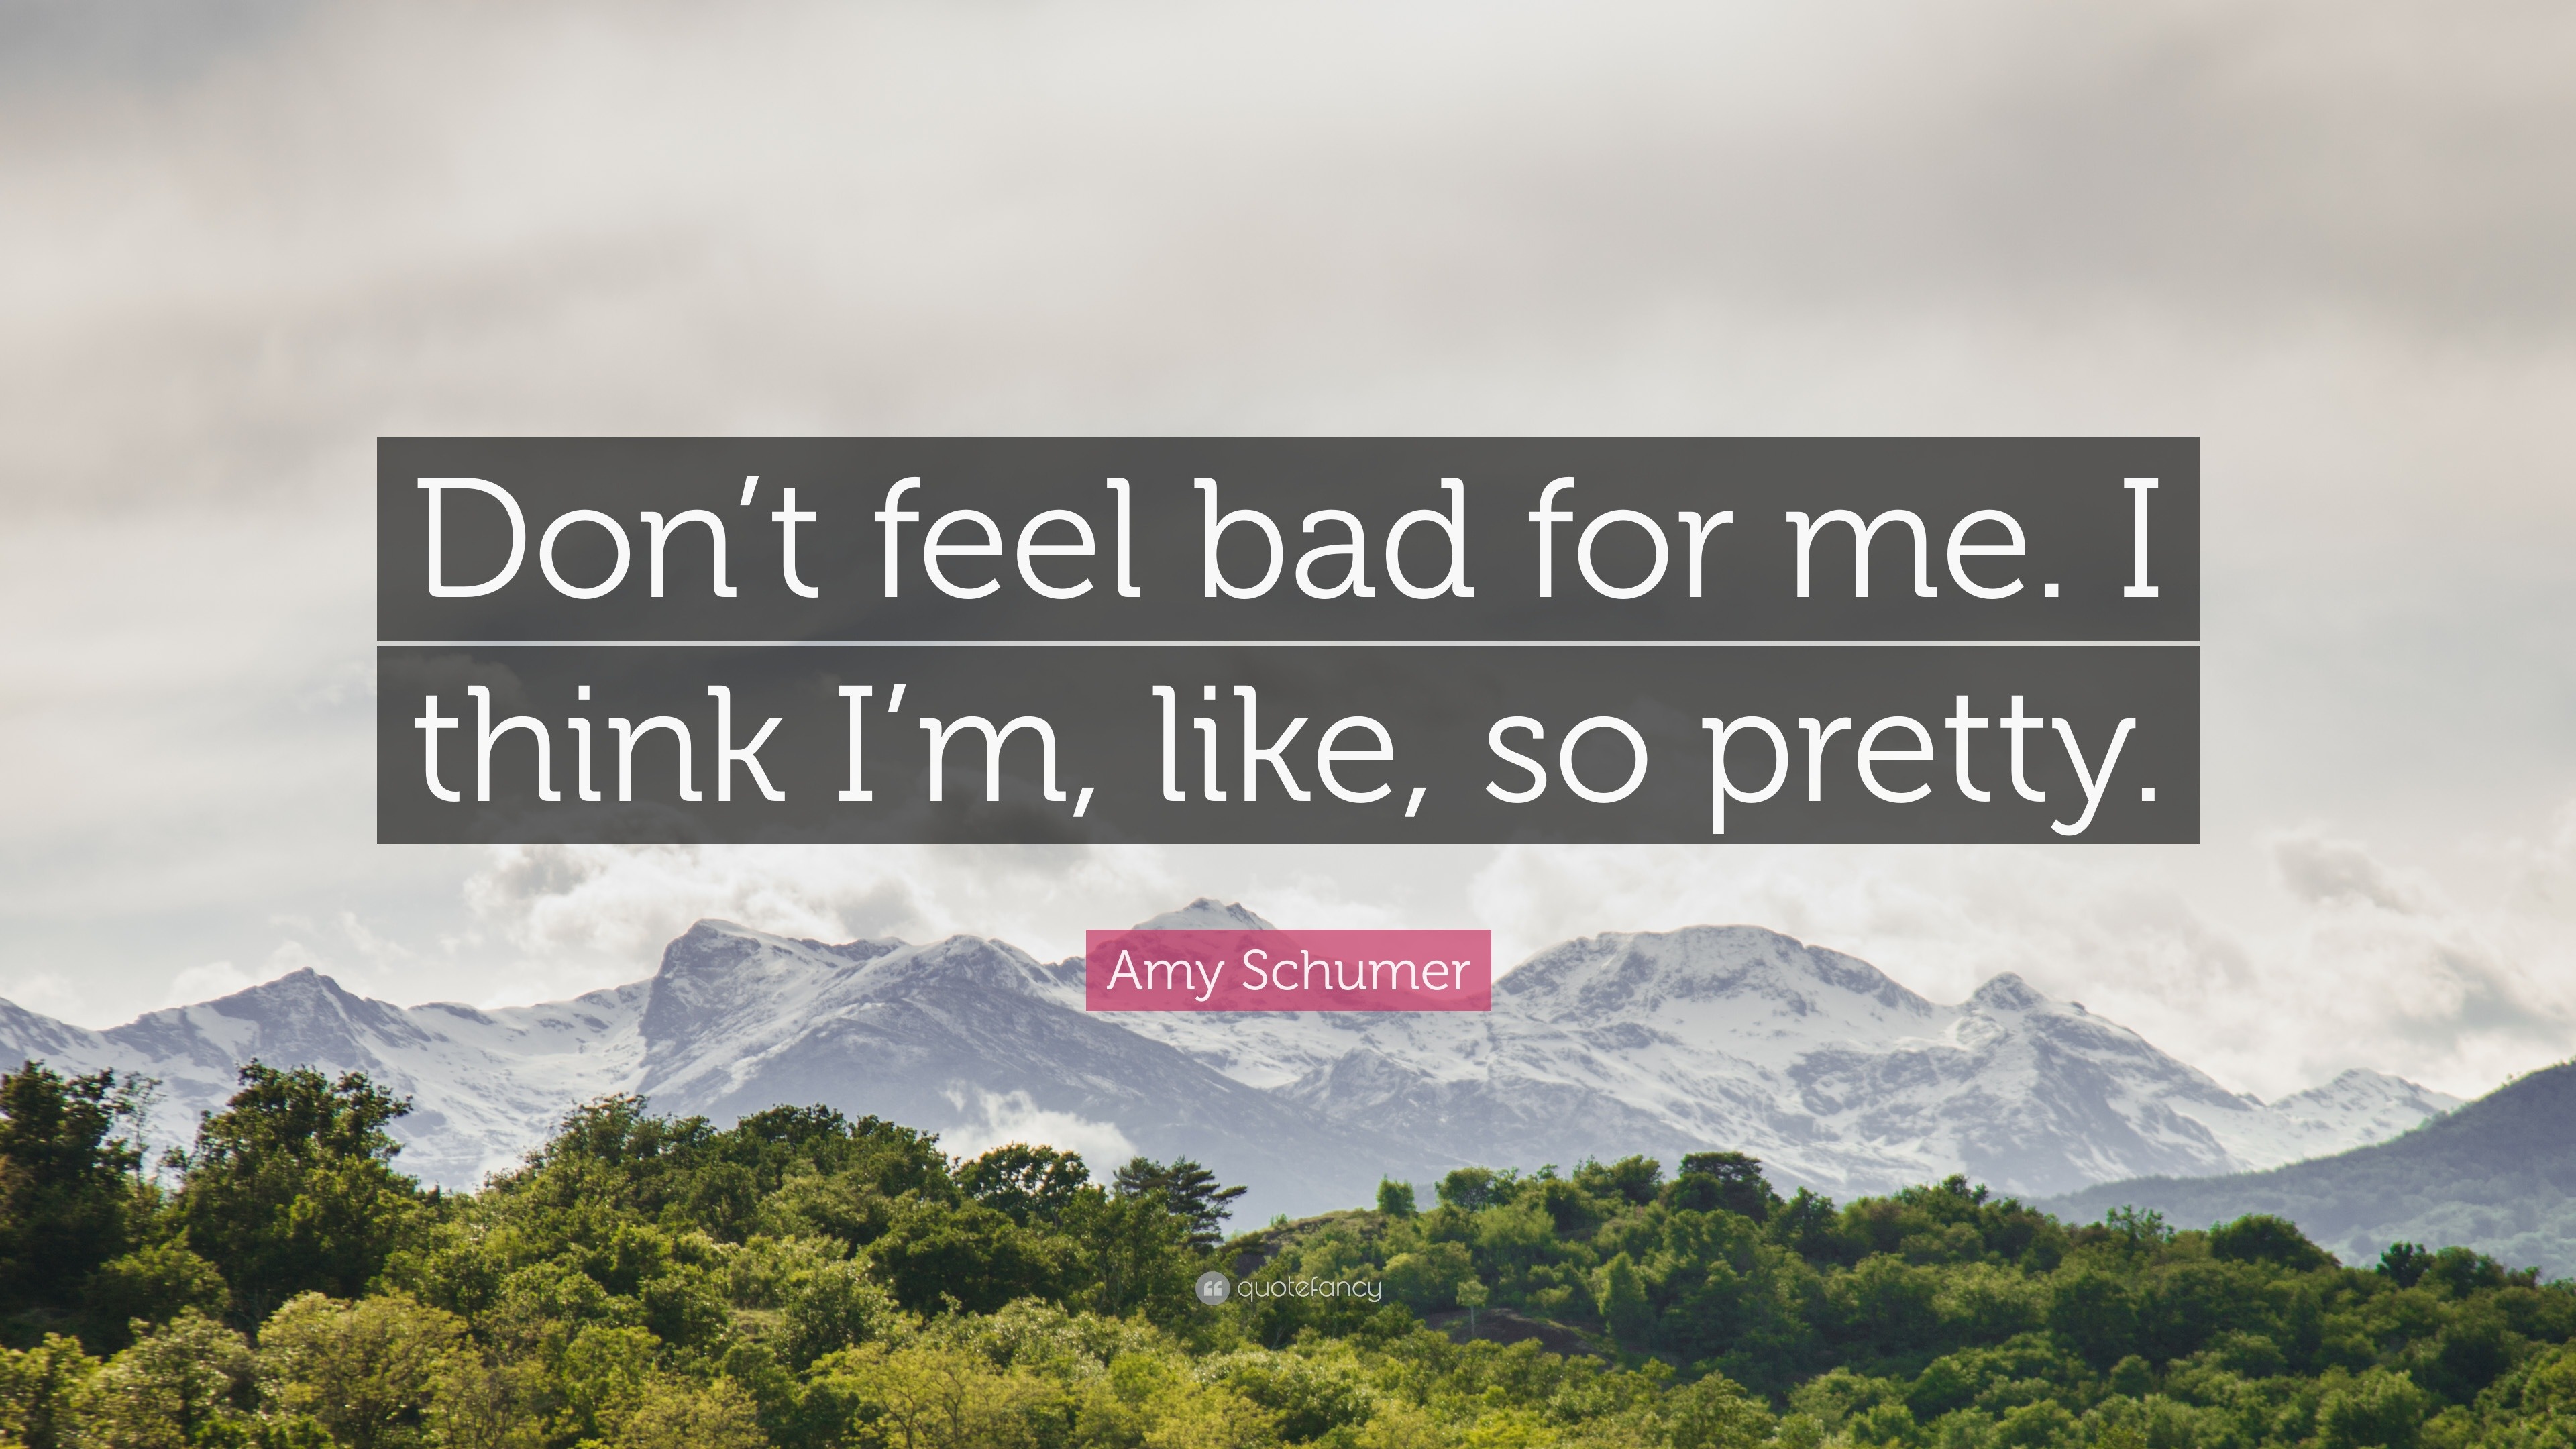 Amy Schumer Quote: “Don't feel bad for me. I think I'm, like, so